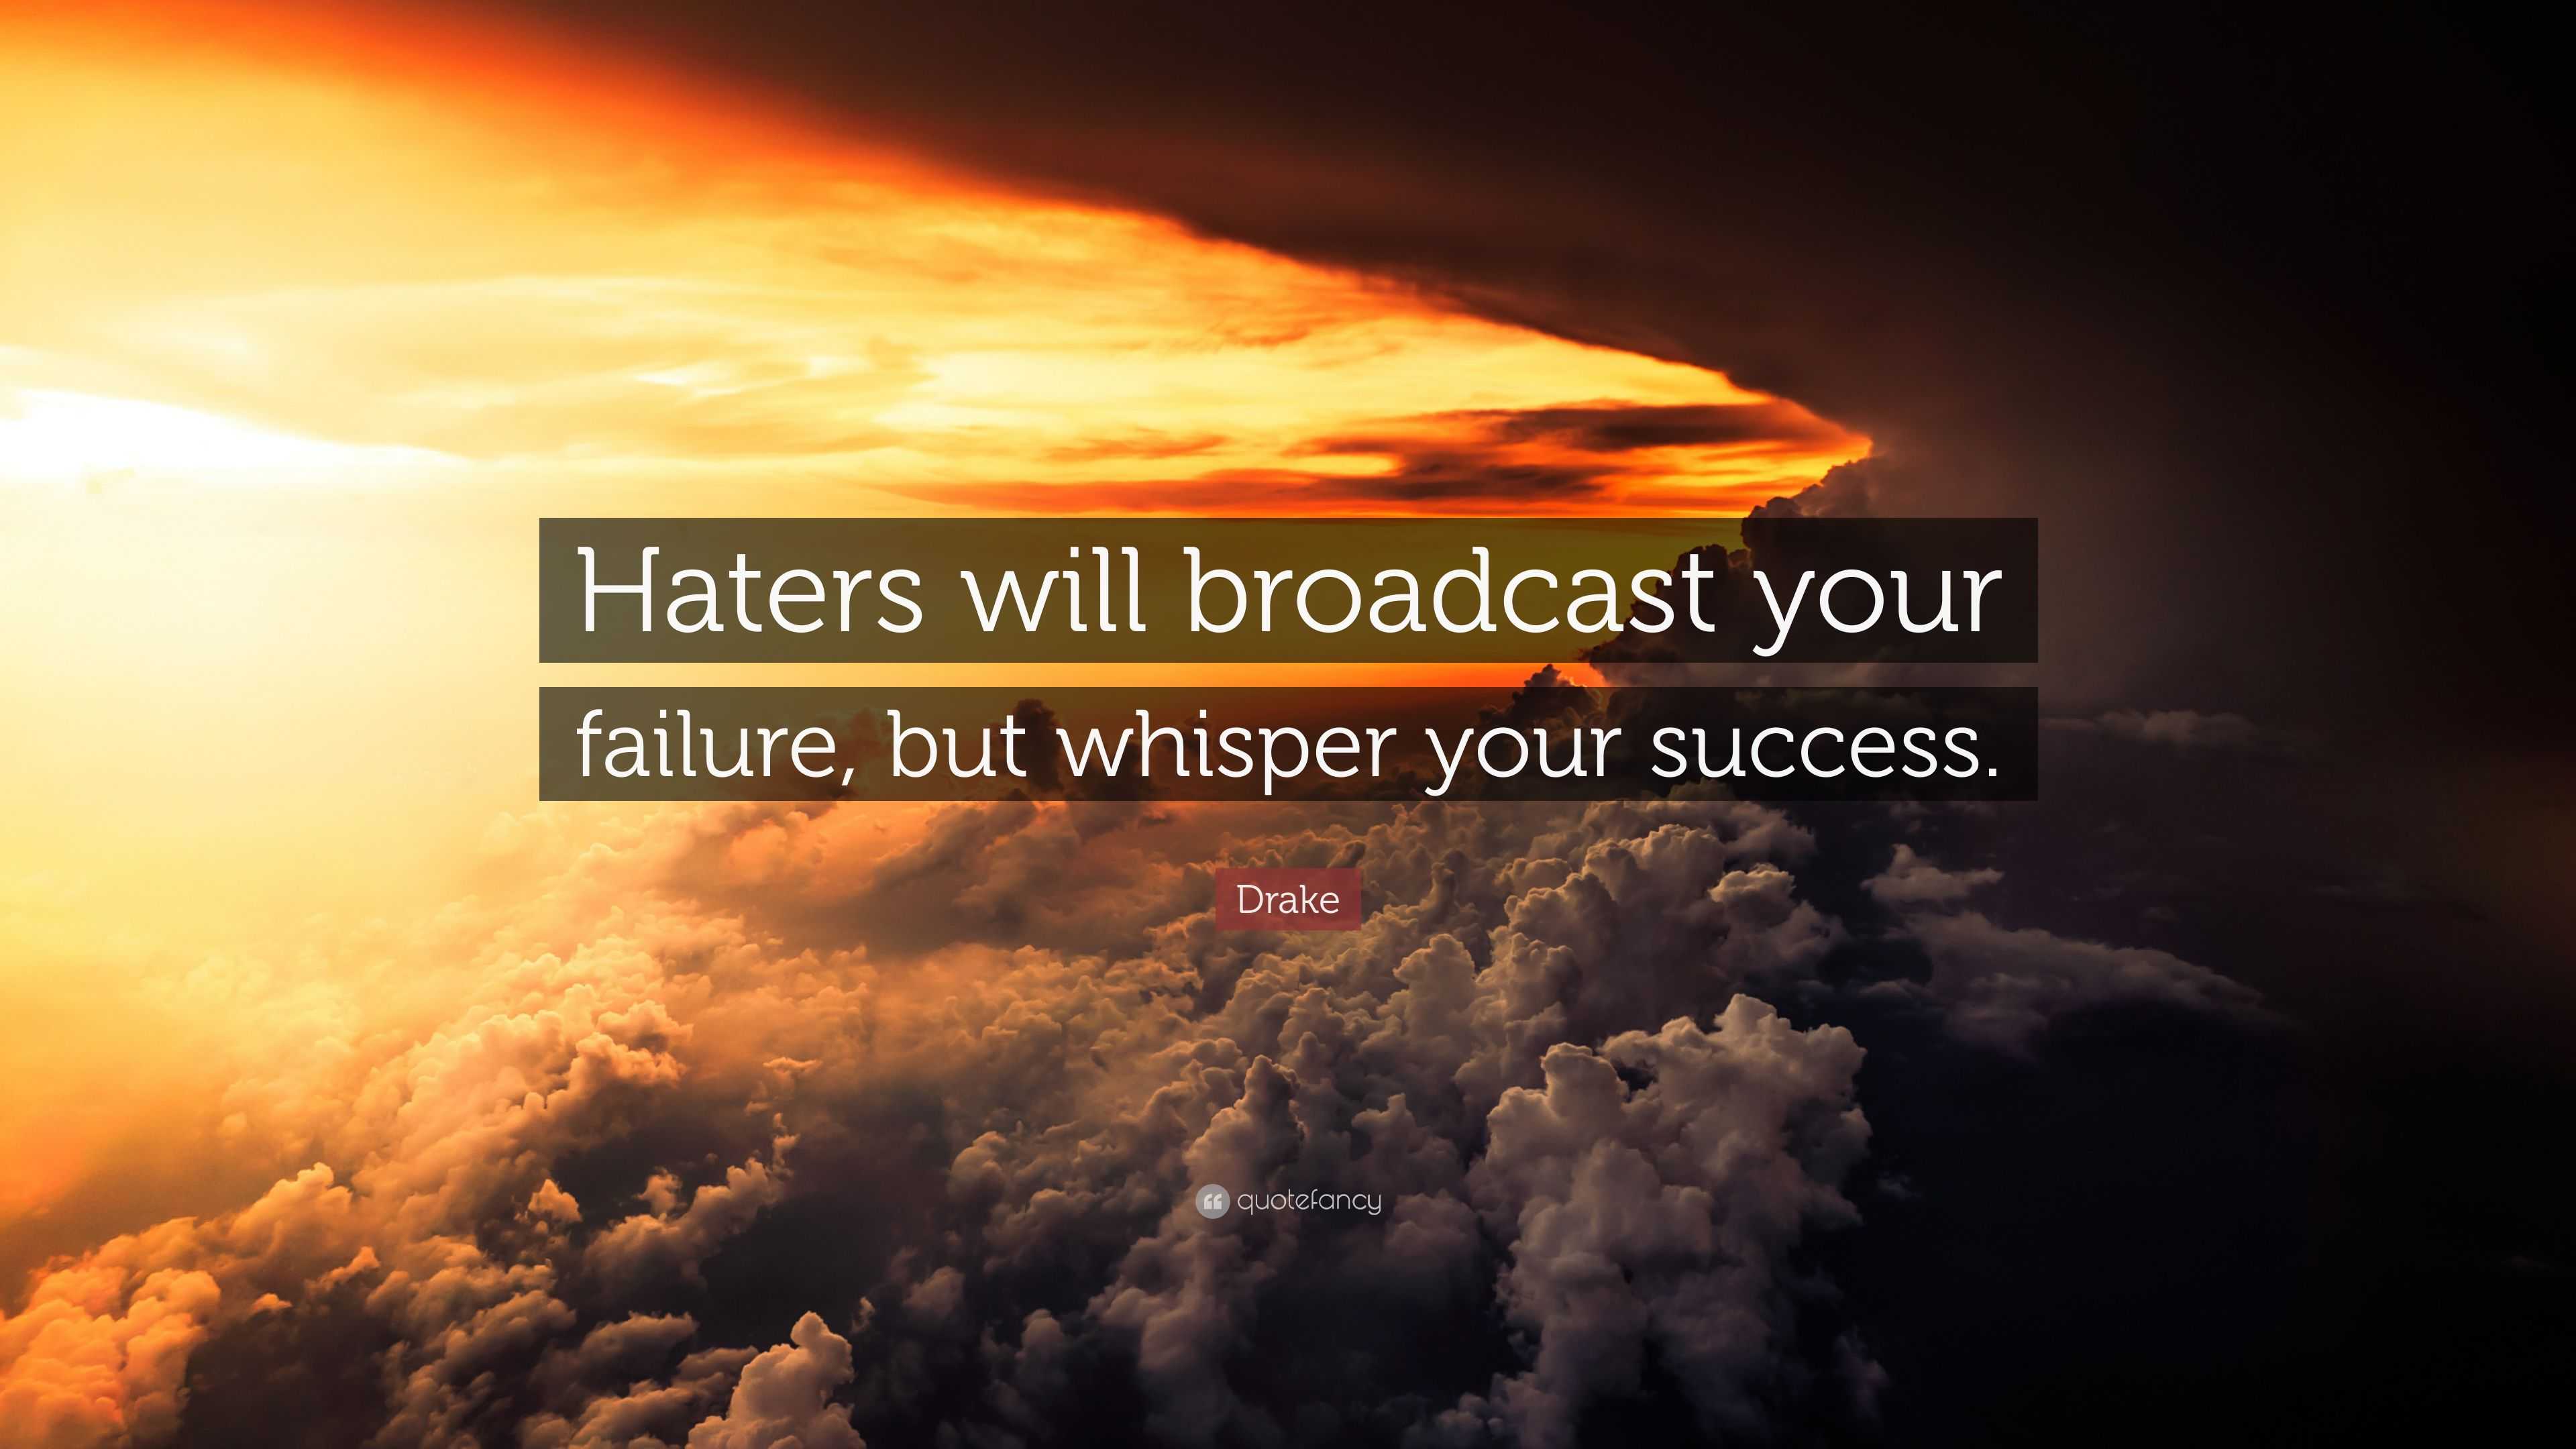 Drake Quote: “Haters will broadcast your failure, but whisper your